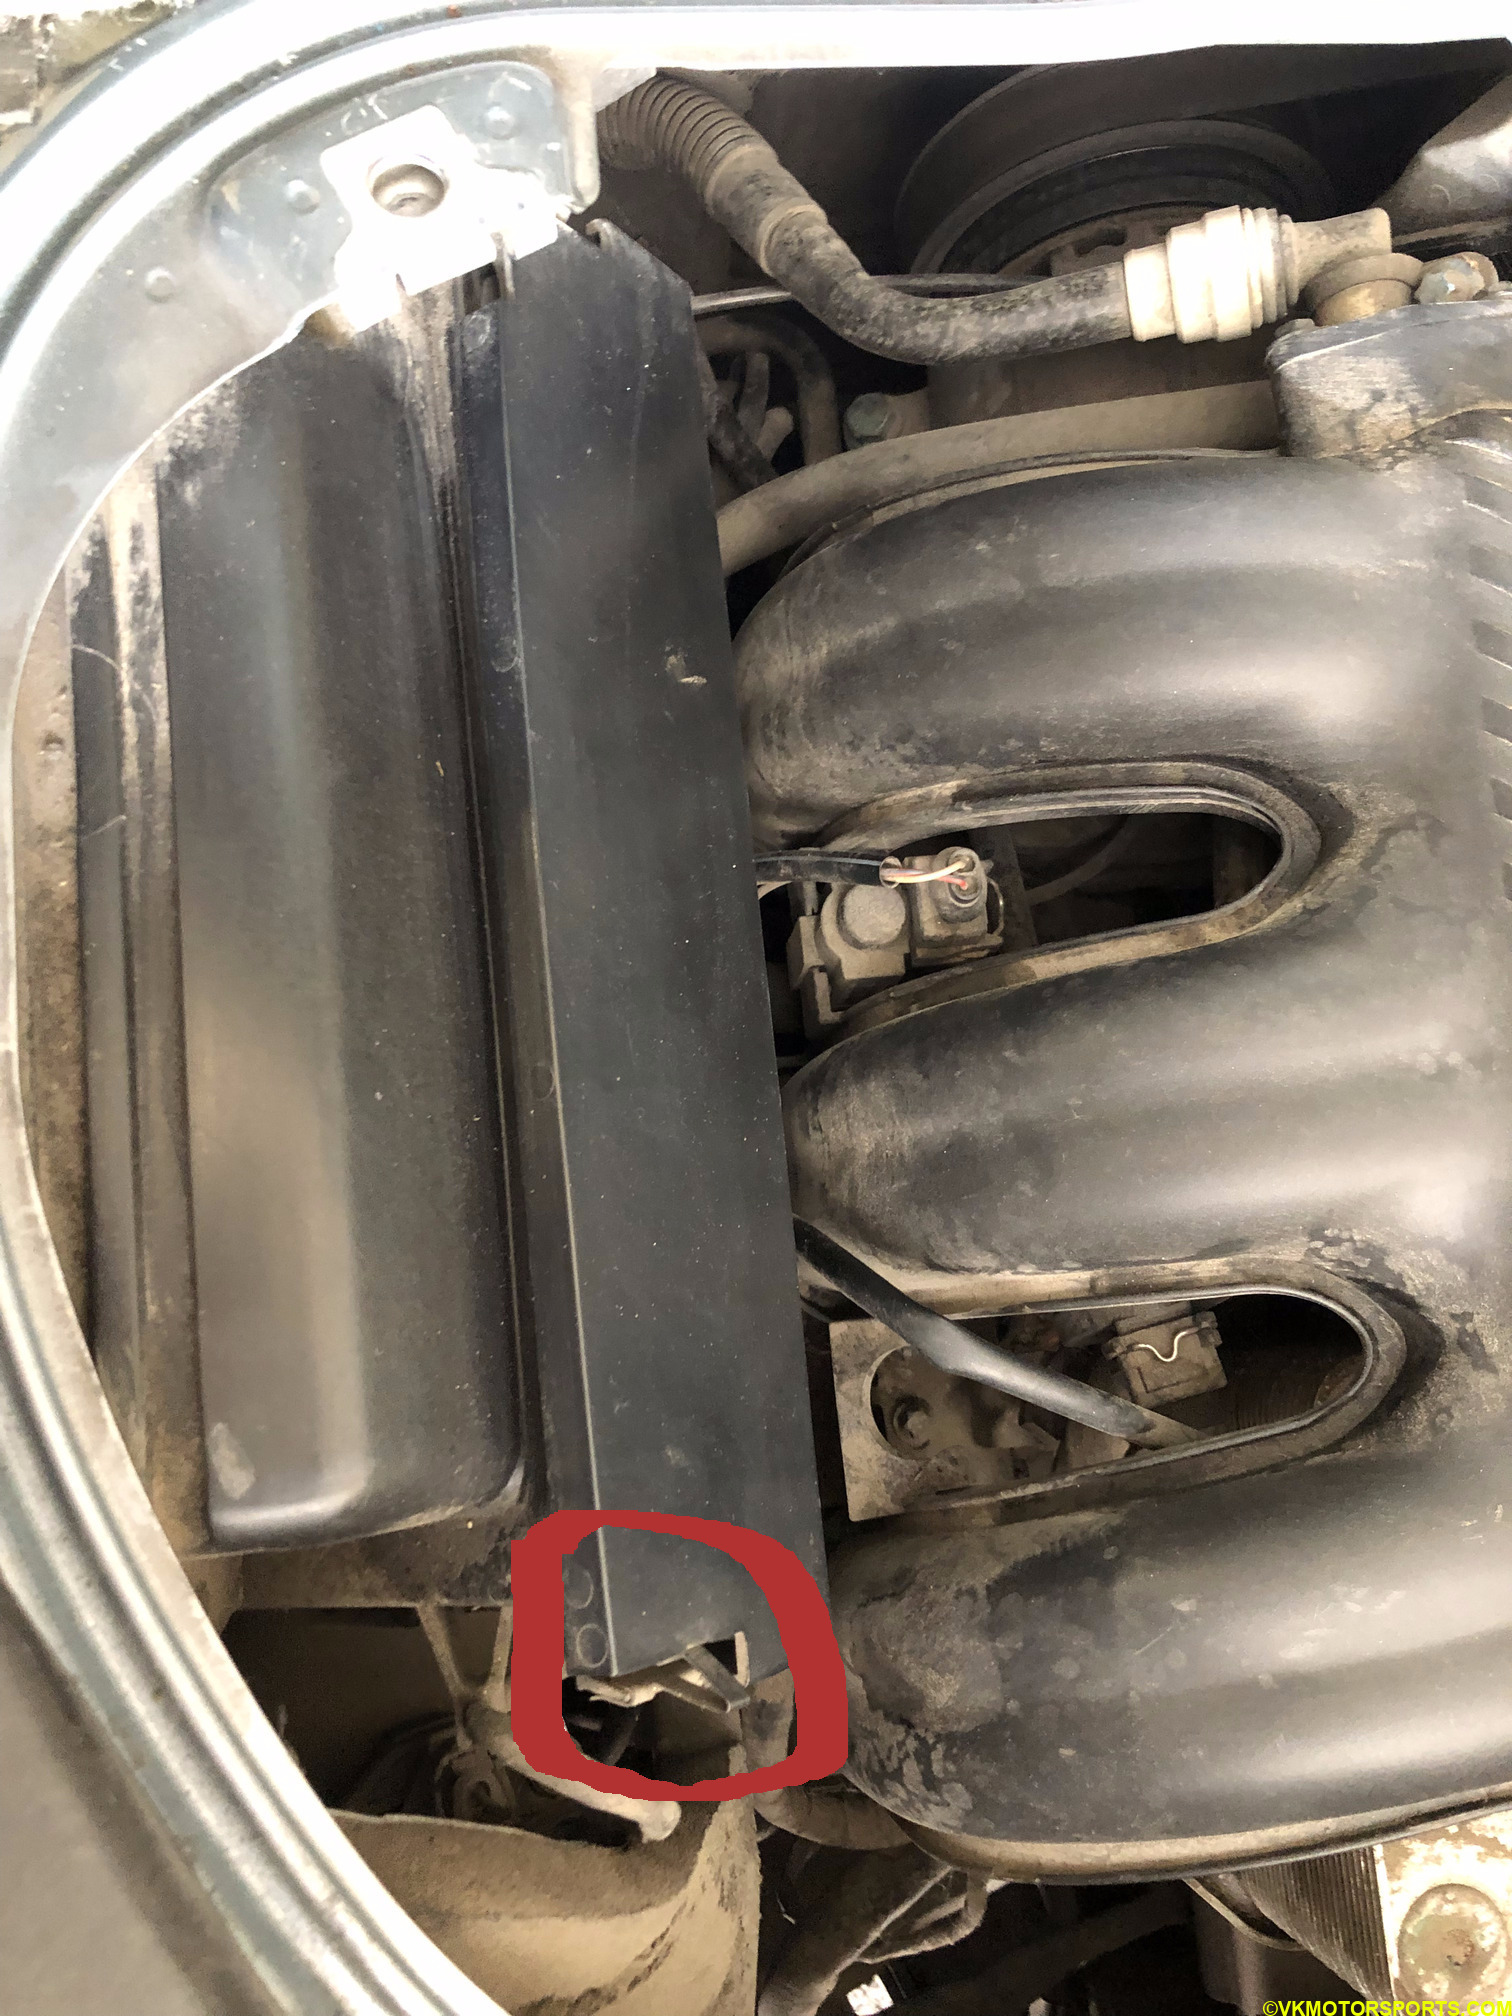 Figure 12. Air filter housing is clean. Note the clip marked with a red circle